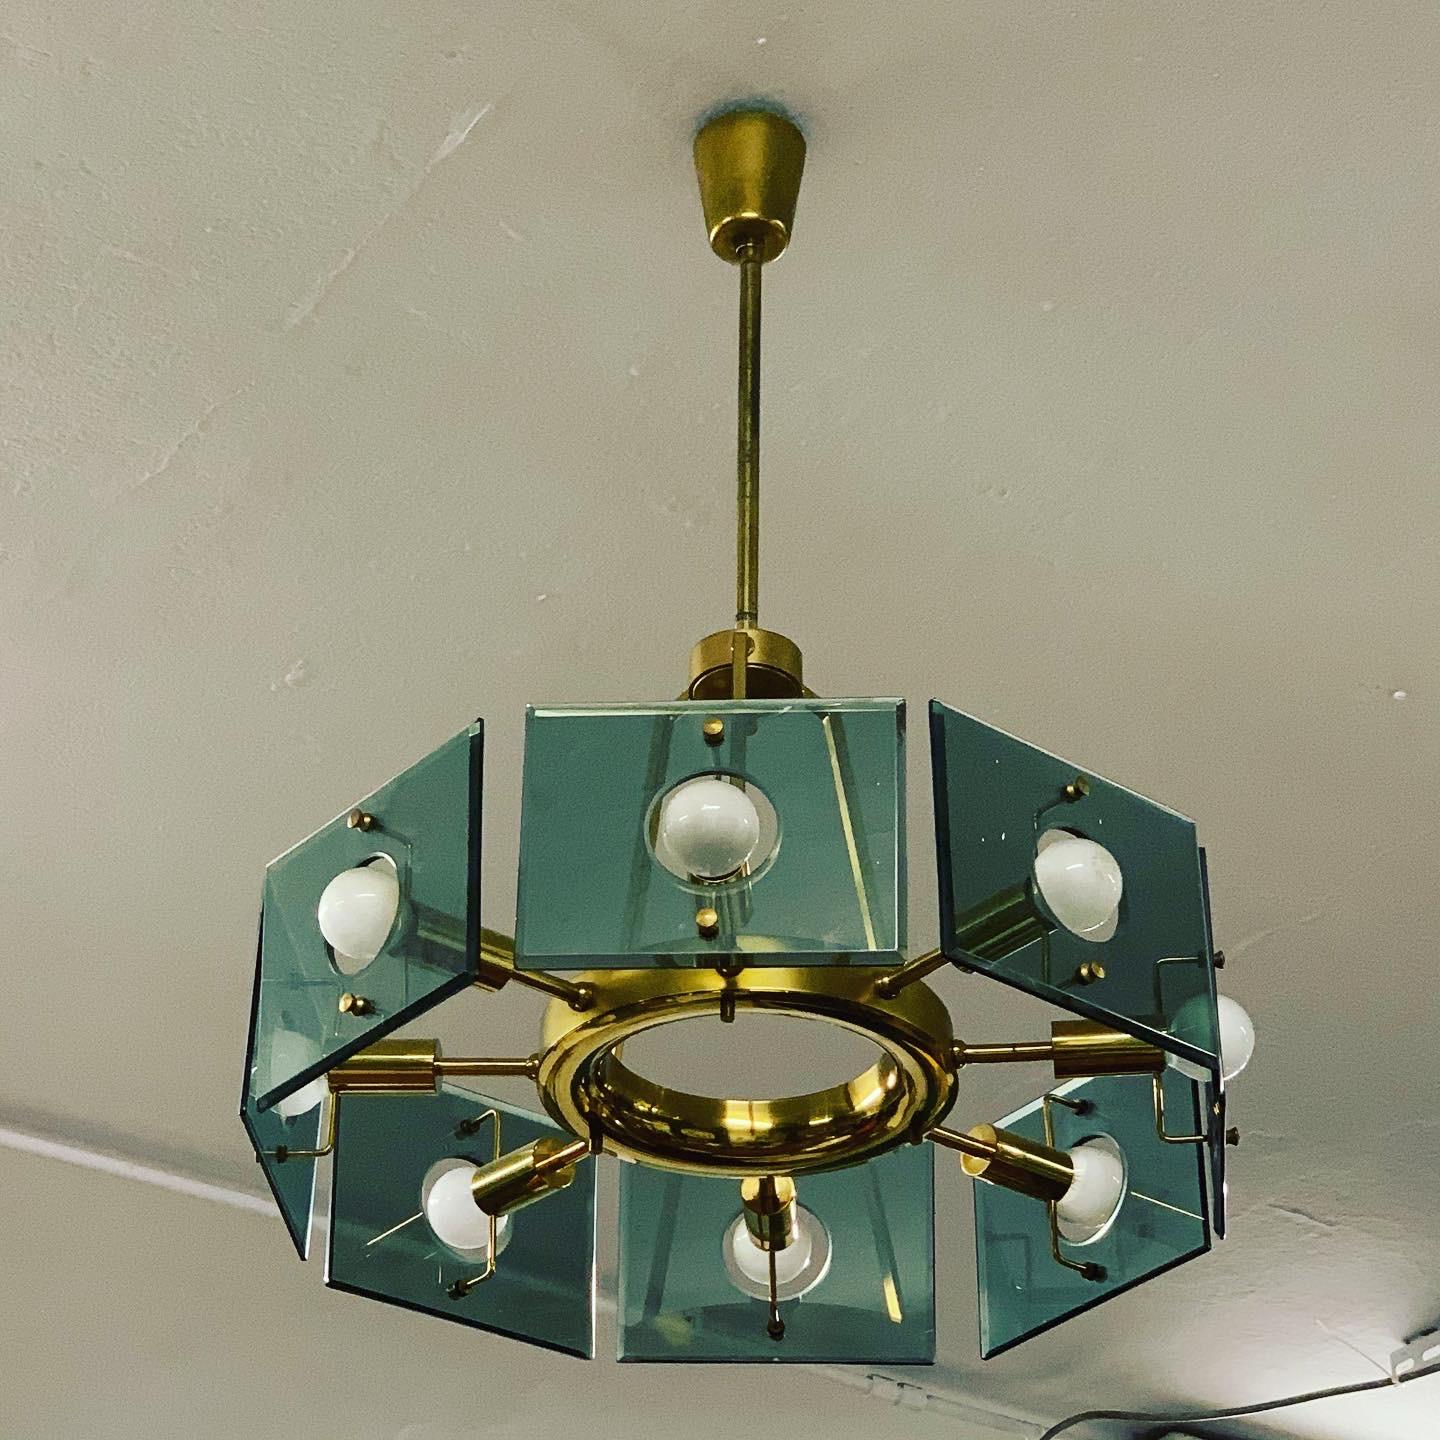 Italian chandelier by designer Gino Paroldo, produced by the company Dino Dei. The luminaire consists of a brass stem, which is developed into a round-shaped halo with 8 light points covered with glass squares that are lightly colored on the outside.